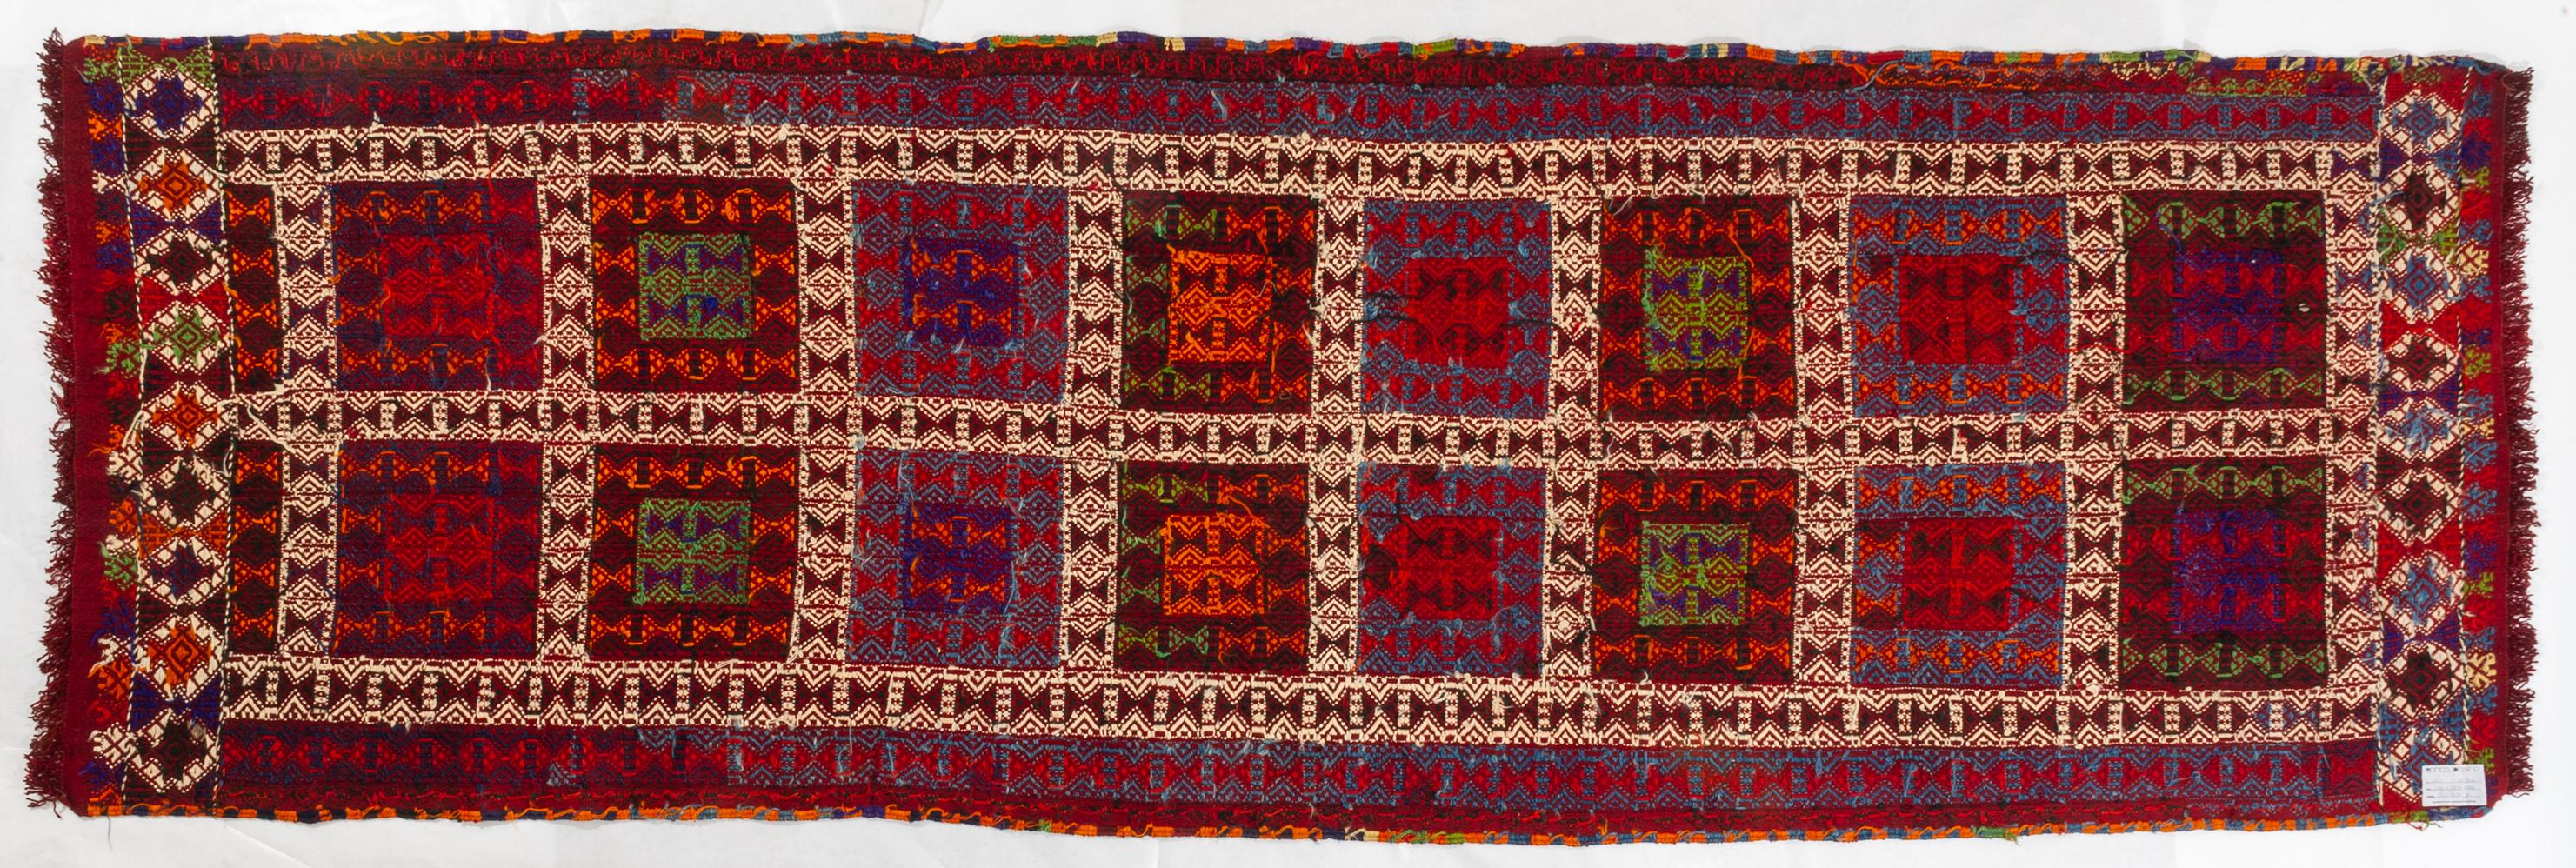 Vintage gallery from the town of Sivas, in Central Anatolia (founded by Ittiti, but famous under Roman domination with the name of Sebastea).
This item is entirely in wool (warp, plot, knotting), wools in bright colors. The design is embroidered on